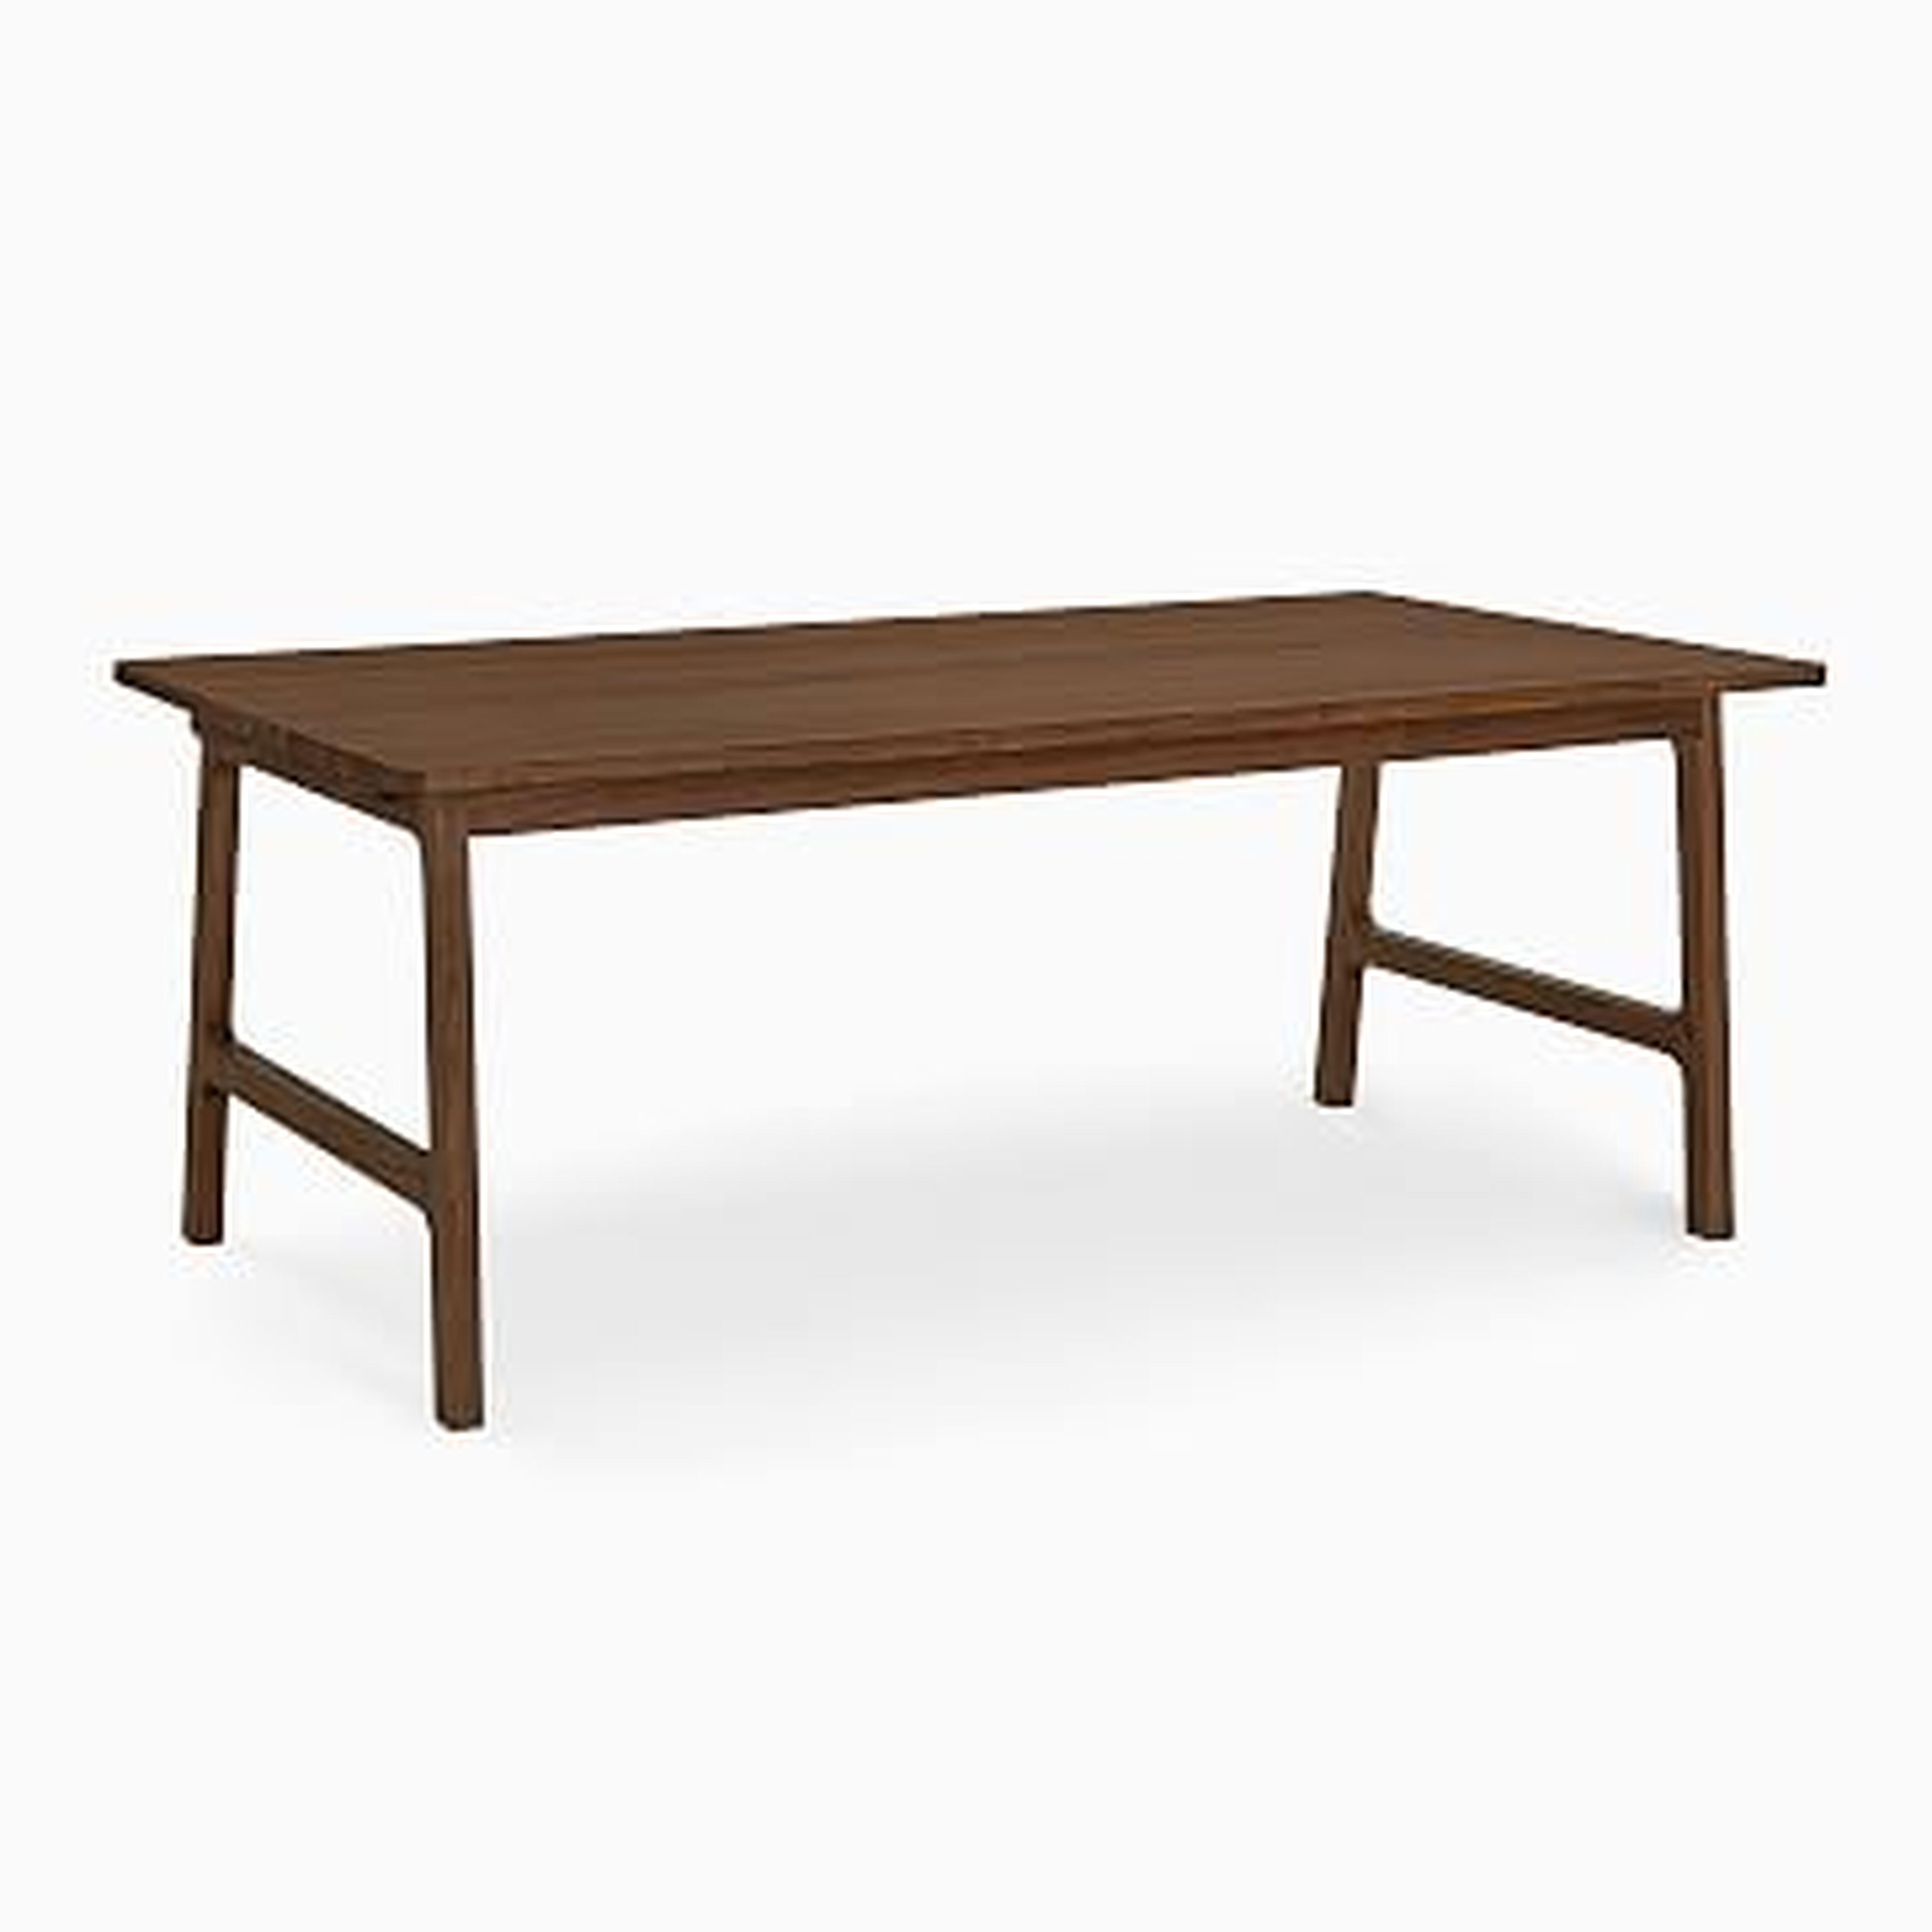 Carlisle Expandable Dining Table Walnut 74-106 in - West Elm